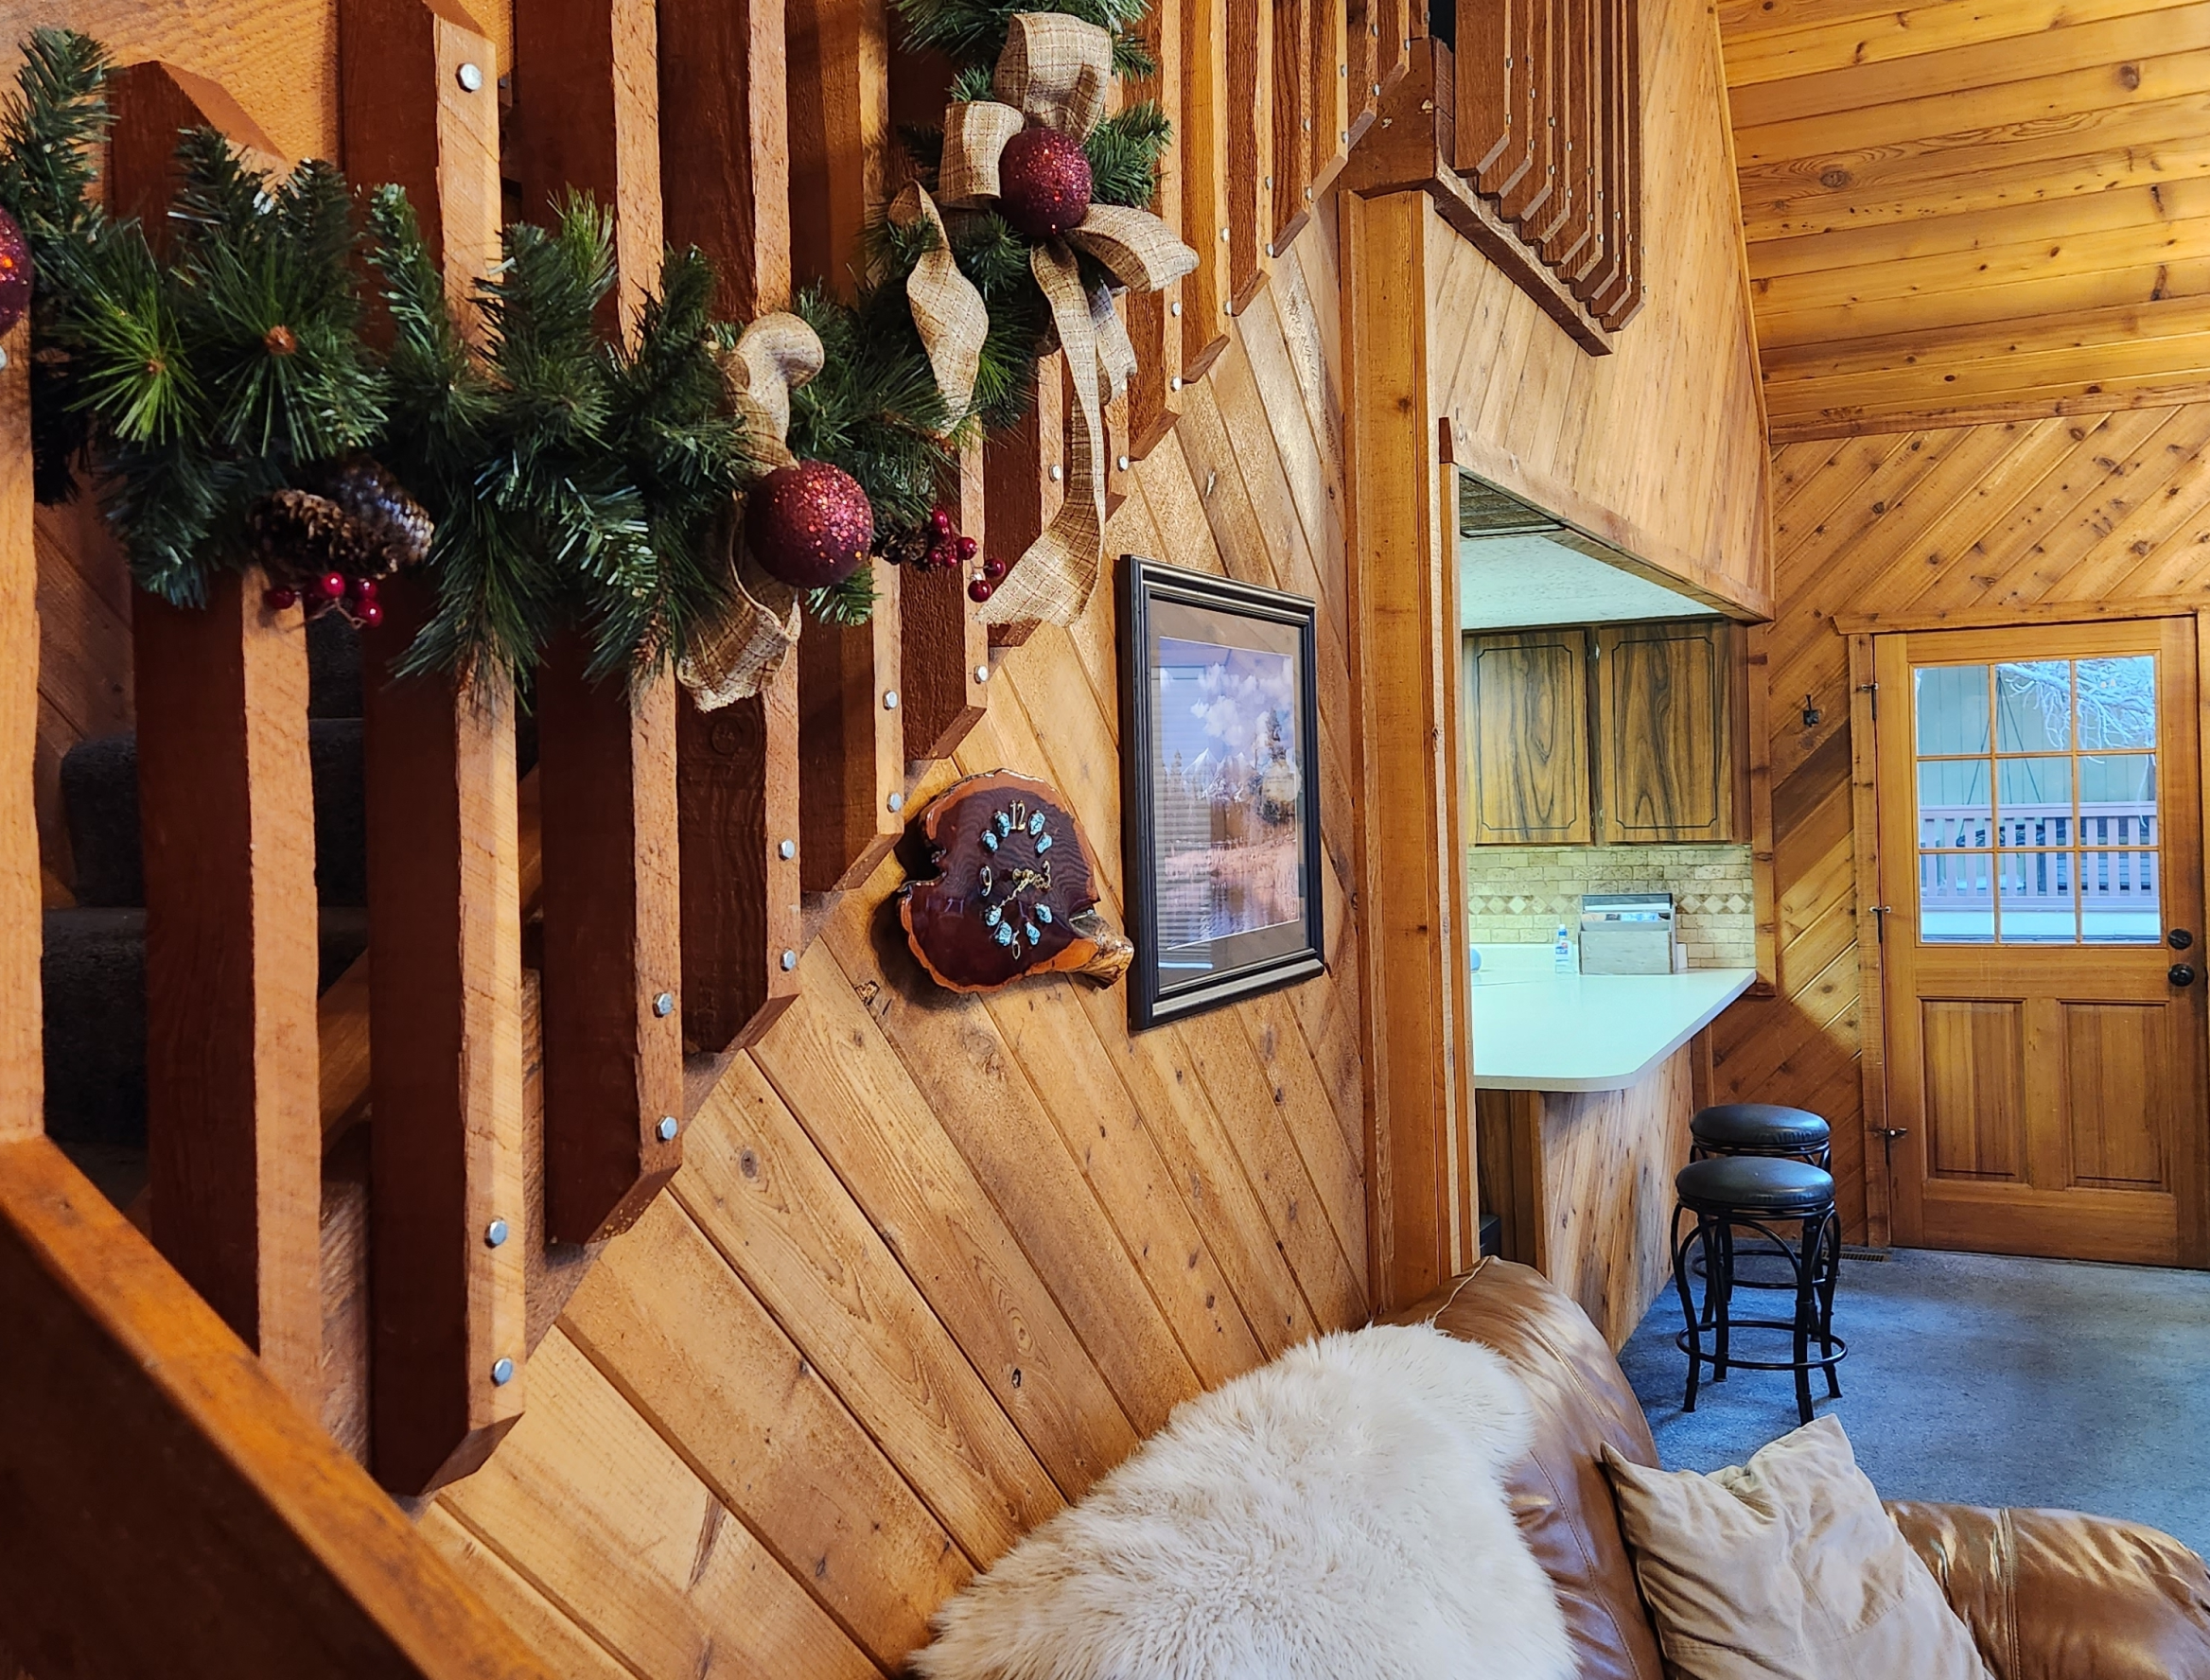 Inside stairway in a cabin home with garland running along the slats of the staircase